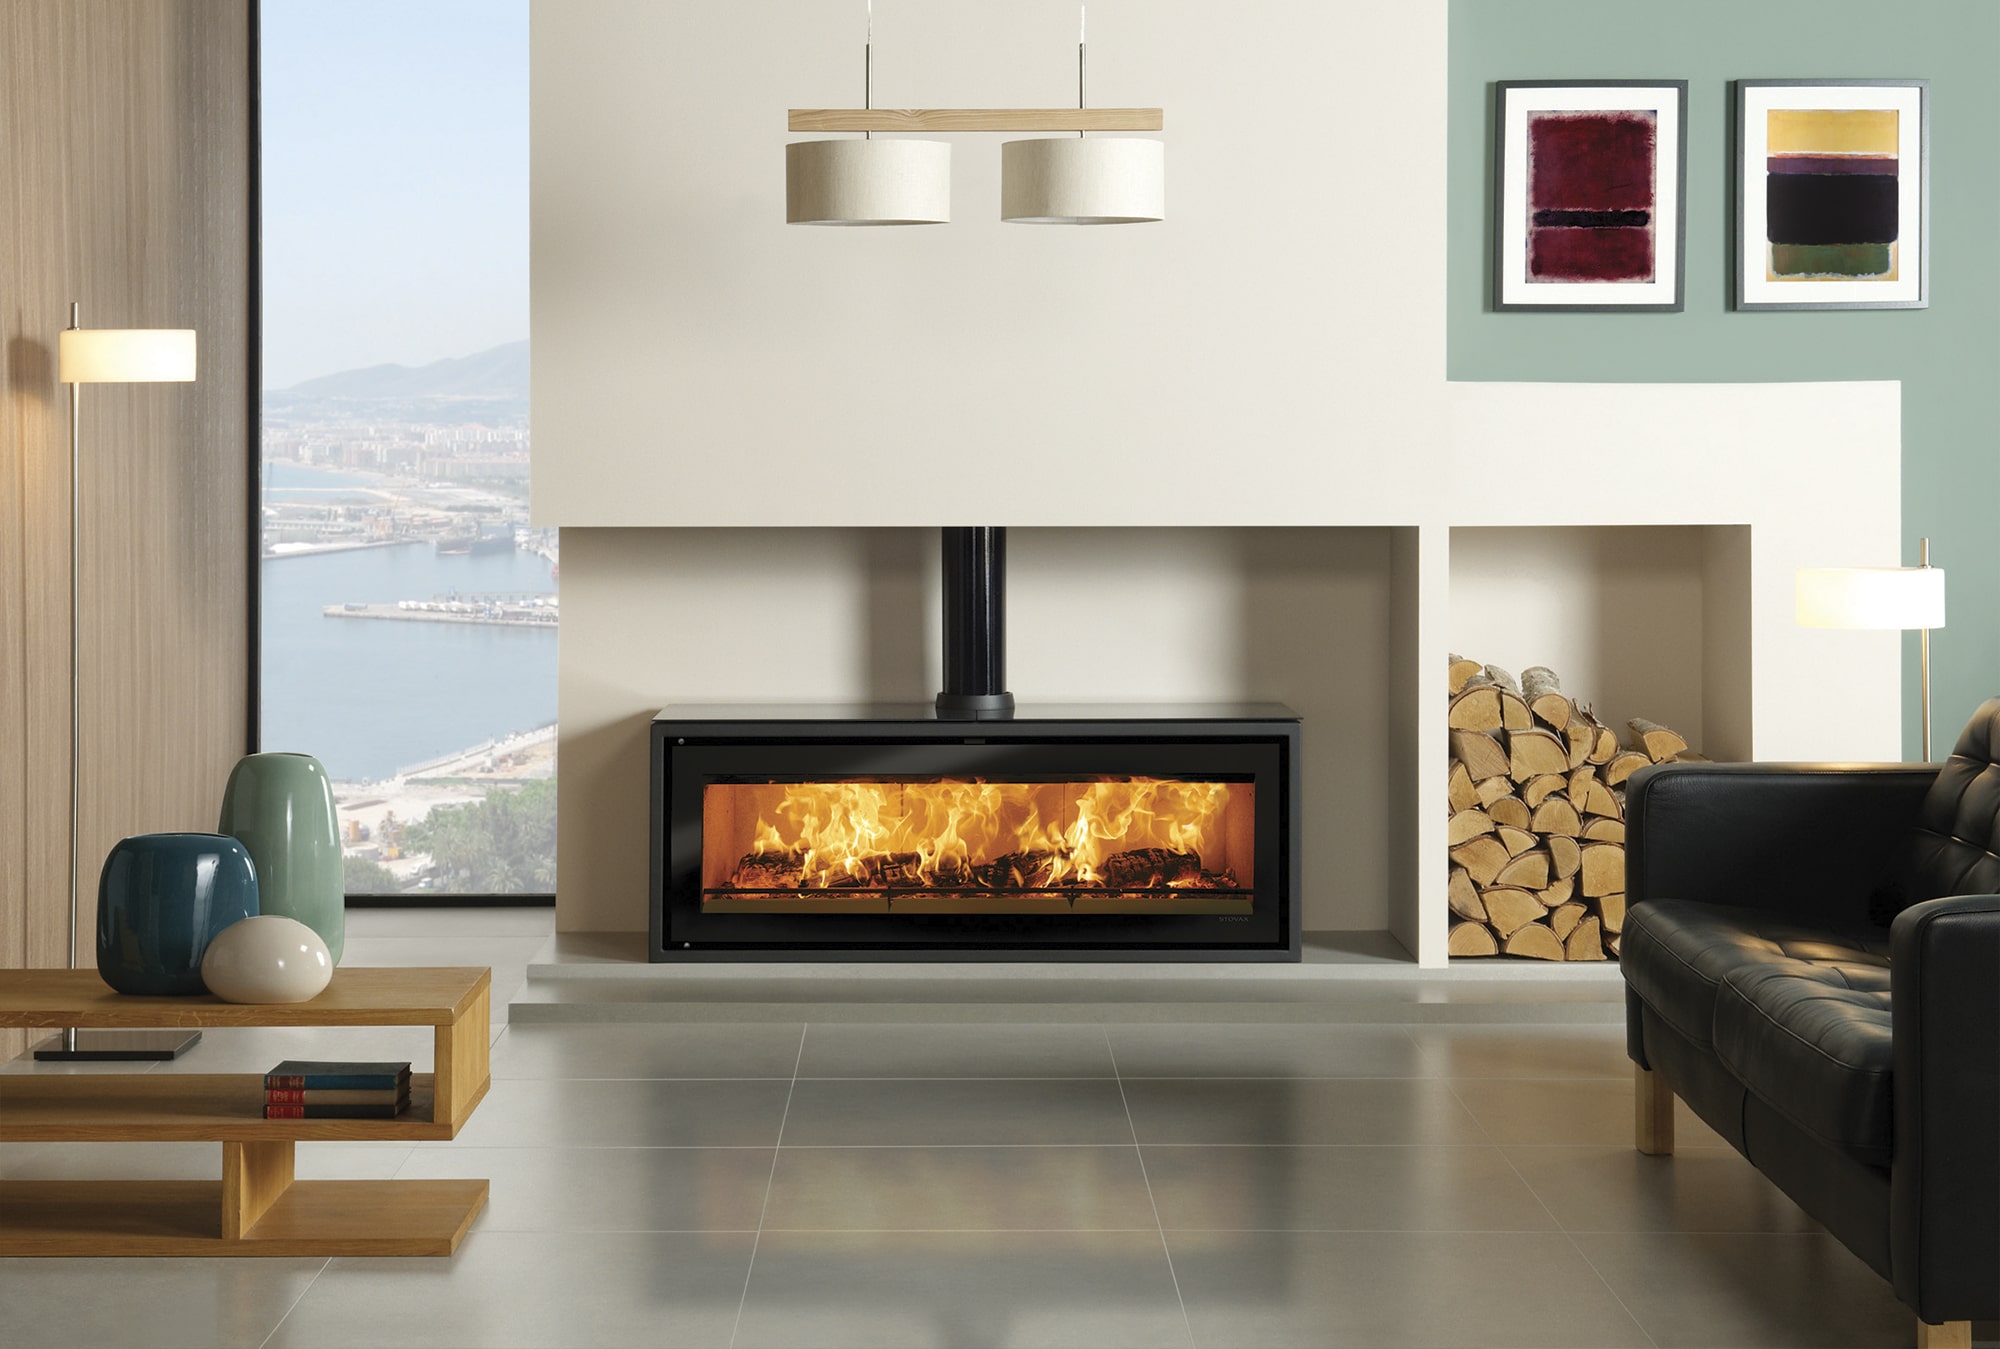 A woodburner with a double view! - Stovax & Gazco